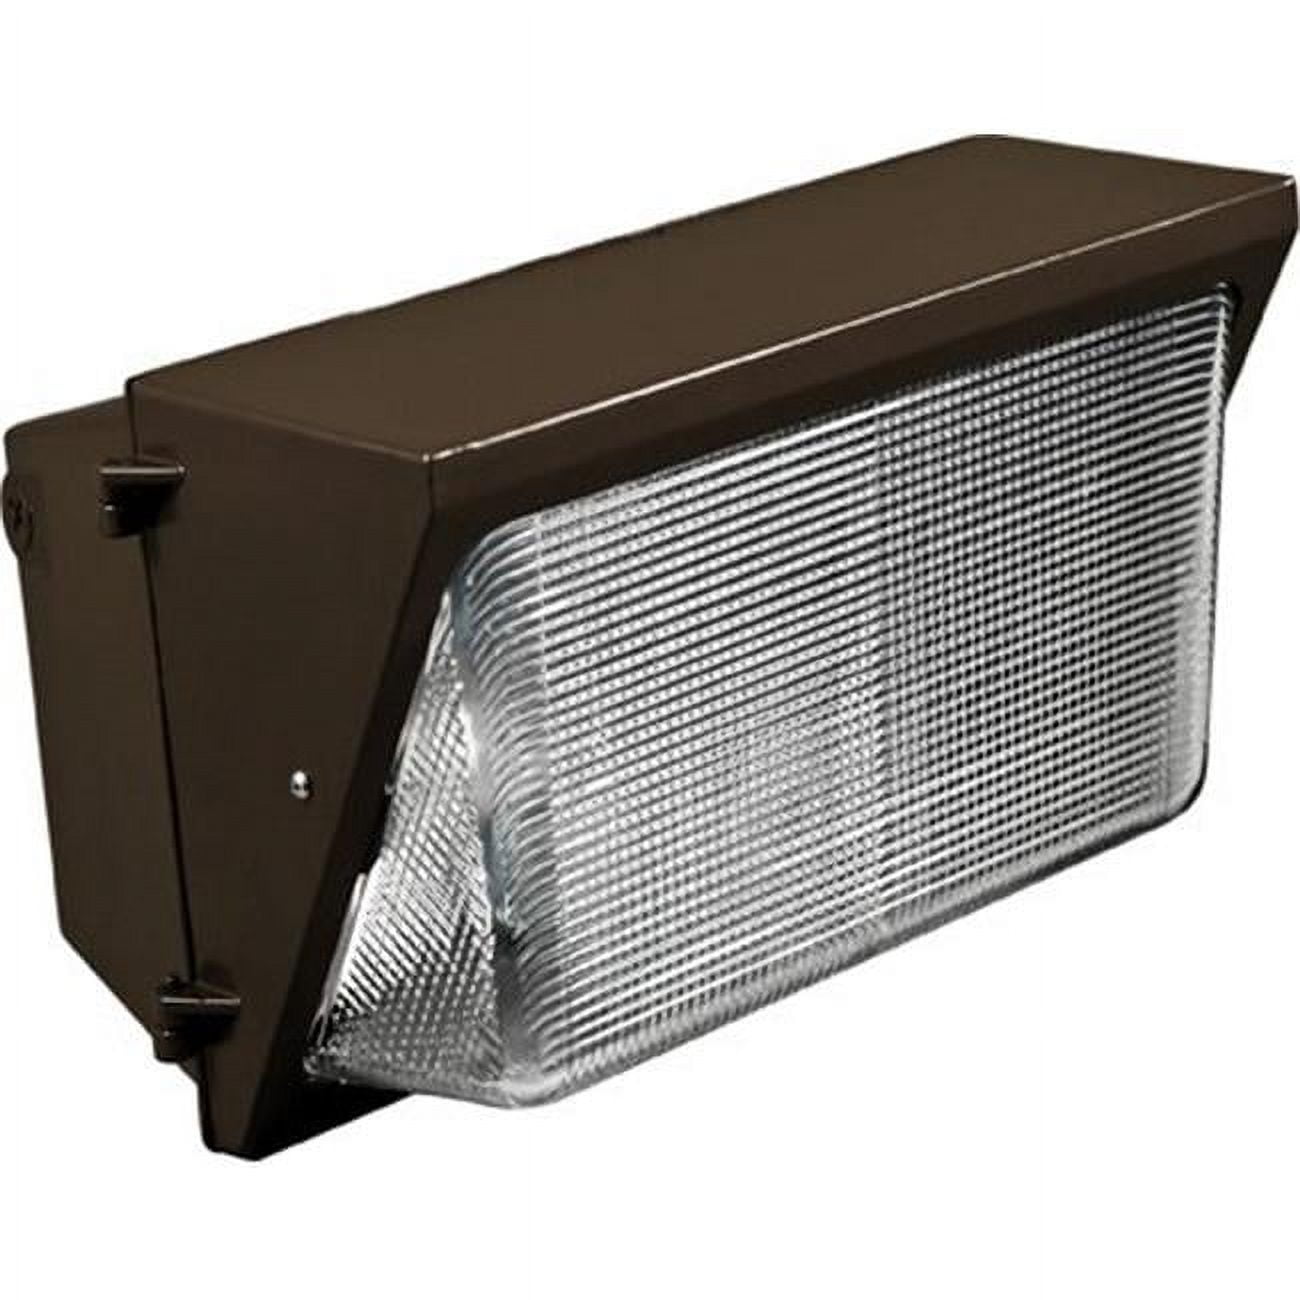 Dw1825-mt 13.38 X 18 X 9 In. 250 Watts Large Wall Pack Fixture With Metal Halide Lamp, Bronze